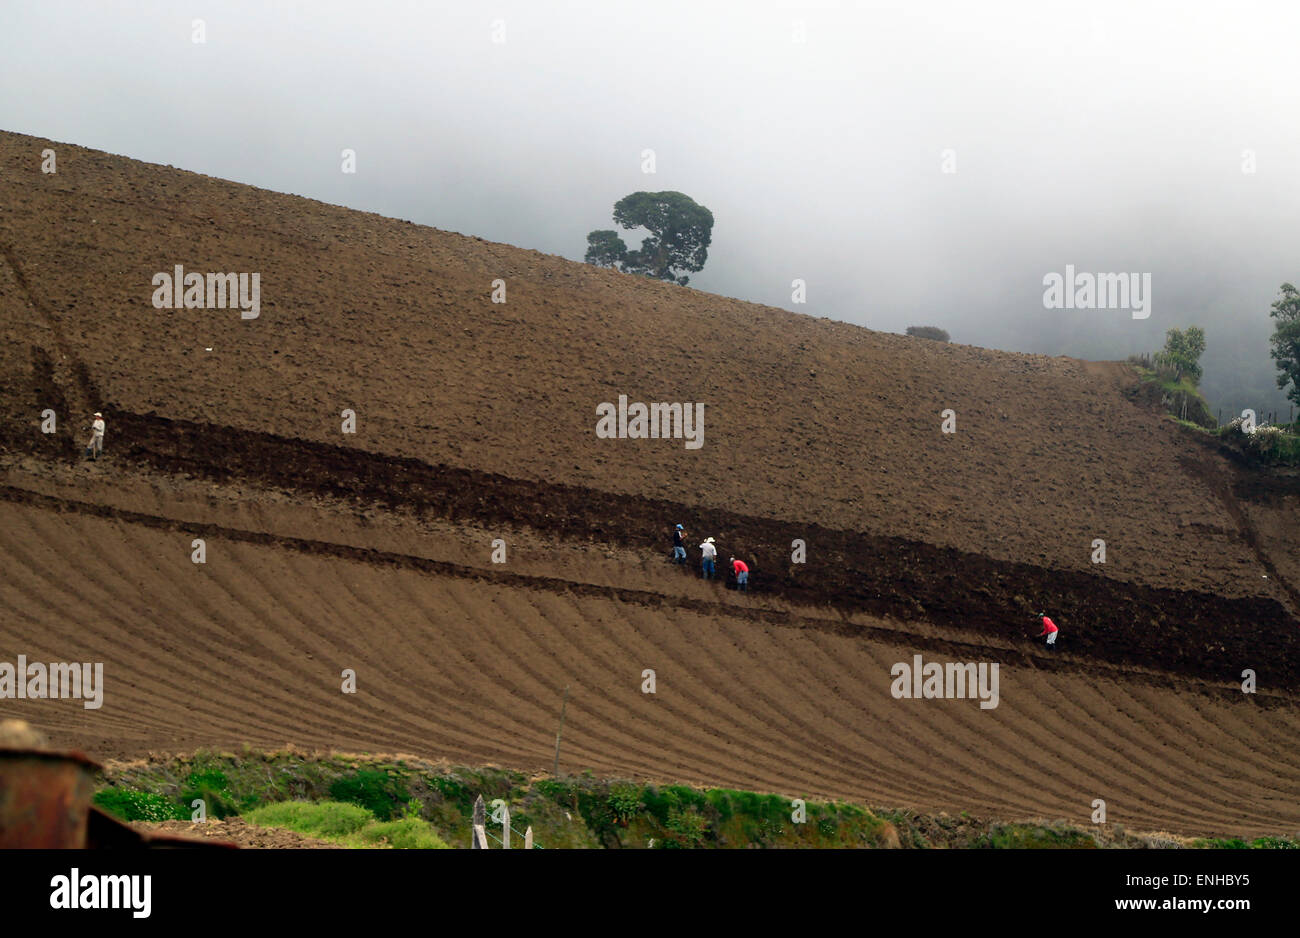 Pacayas De Cartago, Costa Rica. 5th May, 2015. Workers till the soil near Pacayas de Cartago, Costa Rica, on May 5, 2015. The Turrialba volcano has been active since last October, with continuous exhalations of gas and ashes, which has affected cattlemen and farmers in the solpes of the volcano. © Kent Gilbert/Xinhua/Alamy Live News Stock Photo